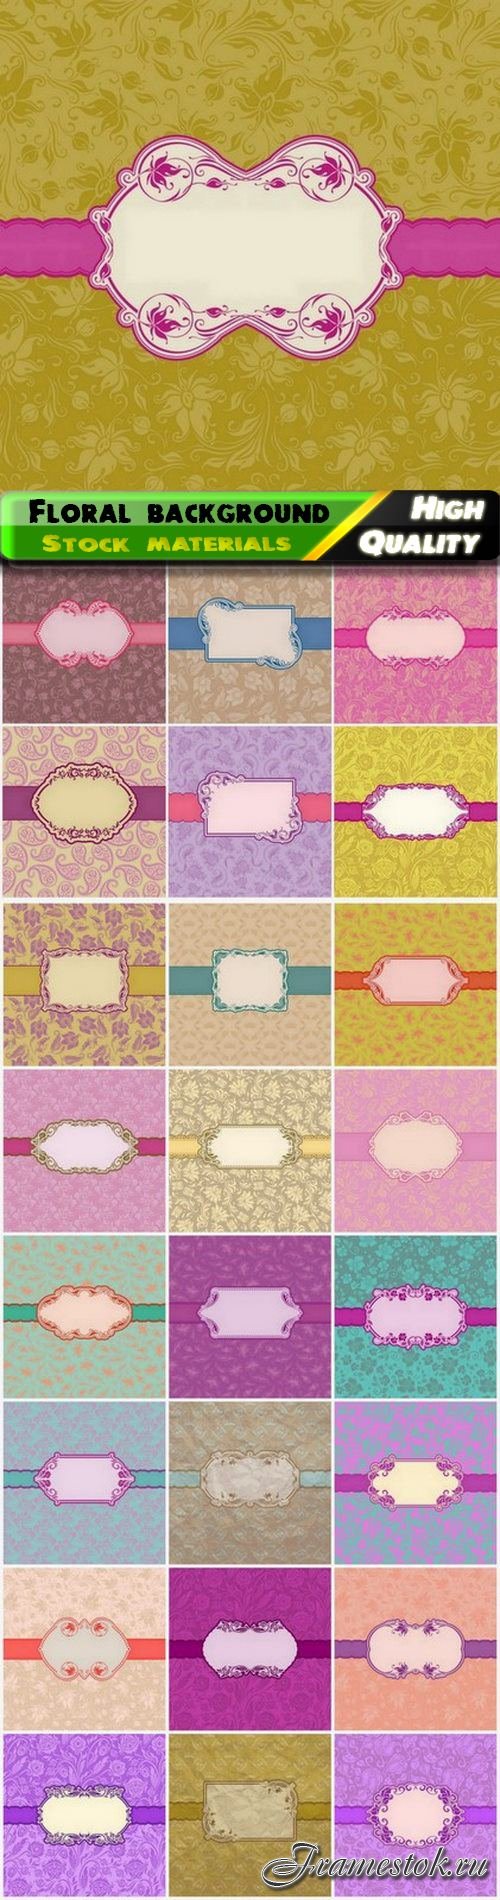 Floral background with frame for greeting card design 25 Eps